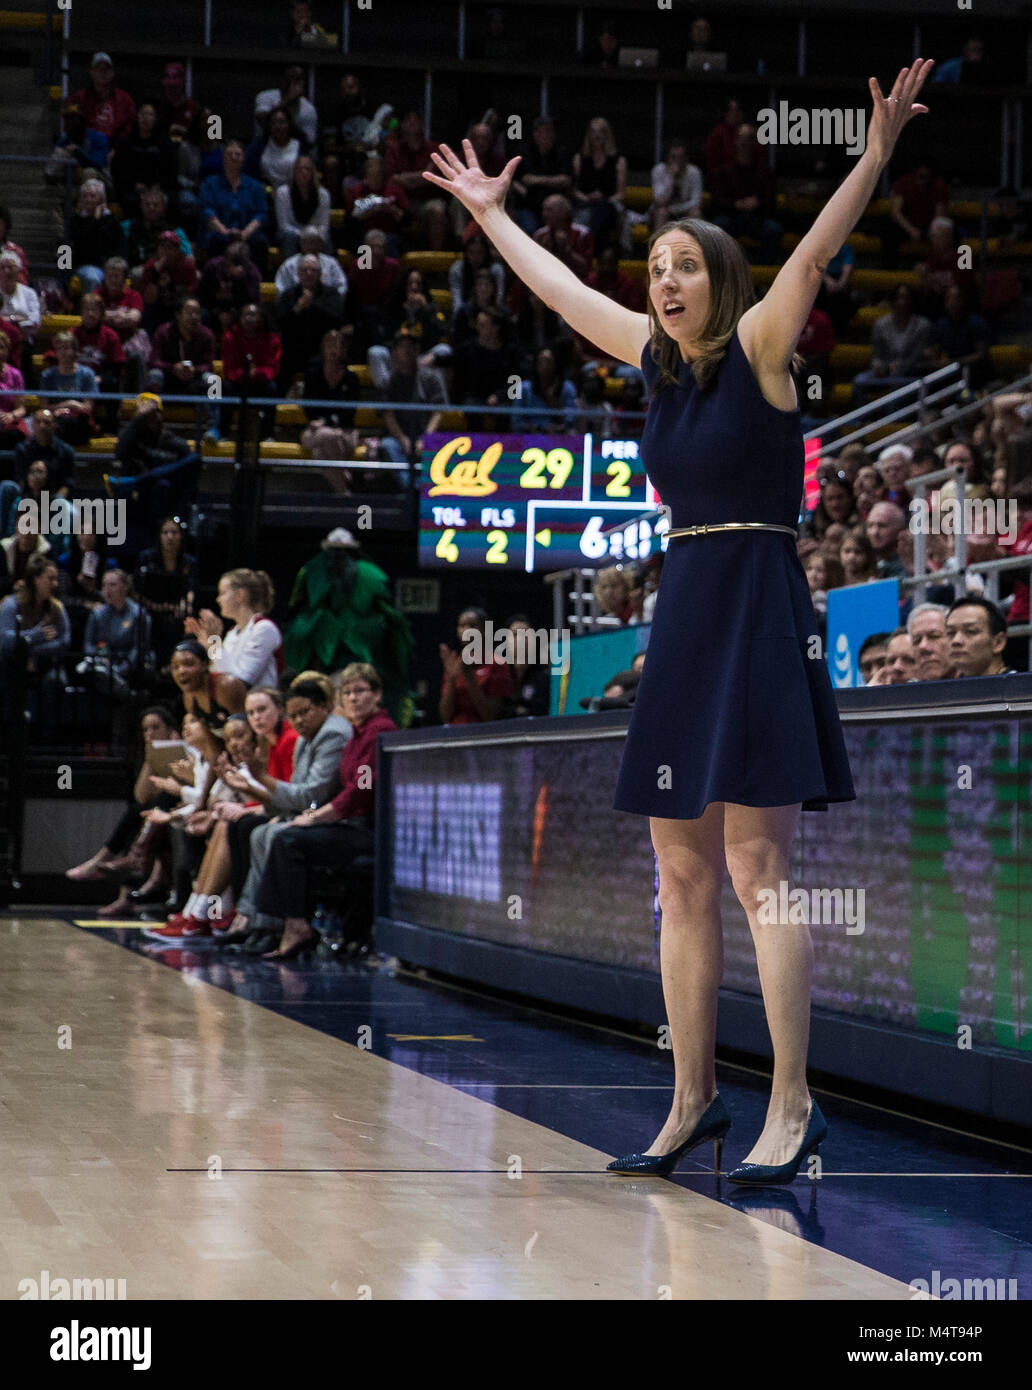 Berkeley, CA U.S. 17th Feb, 2018. A. California head coach Lindsay Gottlieb upset over a bad call by the referee during the NCAA Women's Basketball game between Stanford Cardinal and the California Golden Bears 78-66 win at Hass Pavilion Berkeley Calif. Thurman James/CSM/Alamy Live News Stock Photo